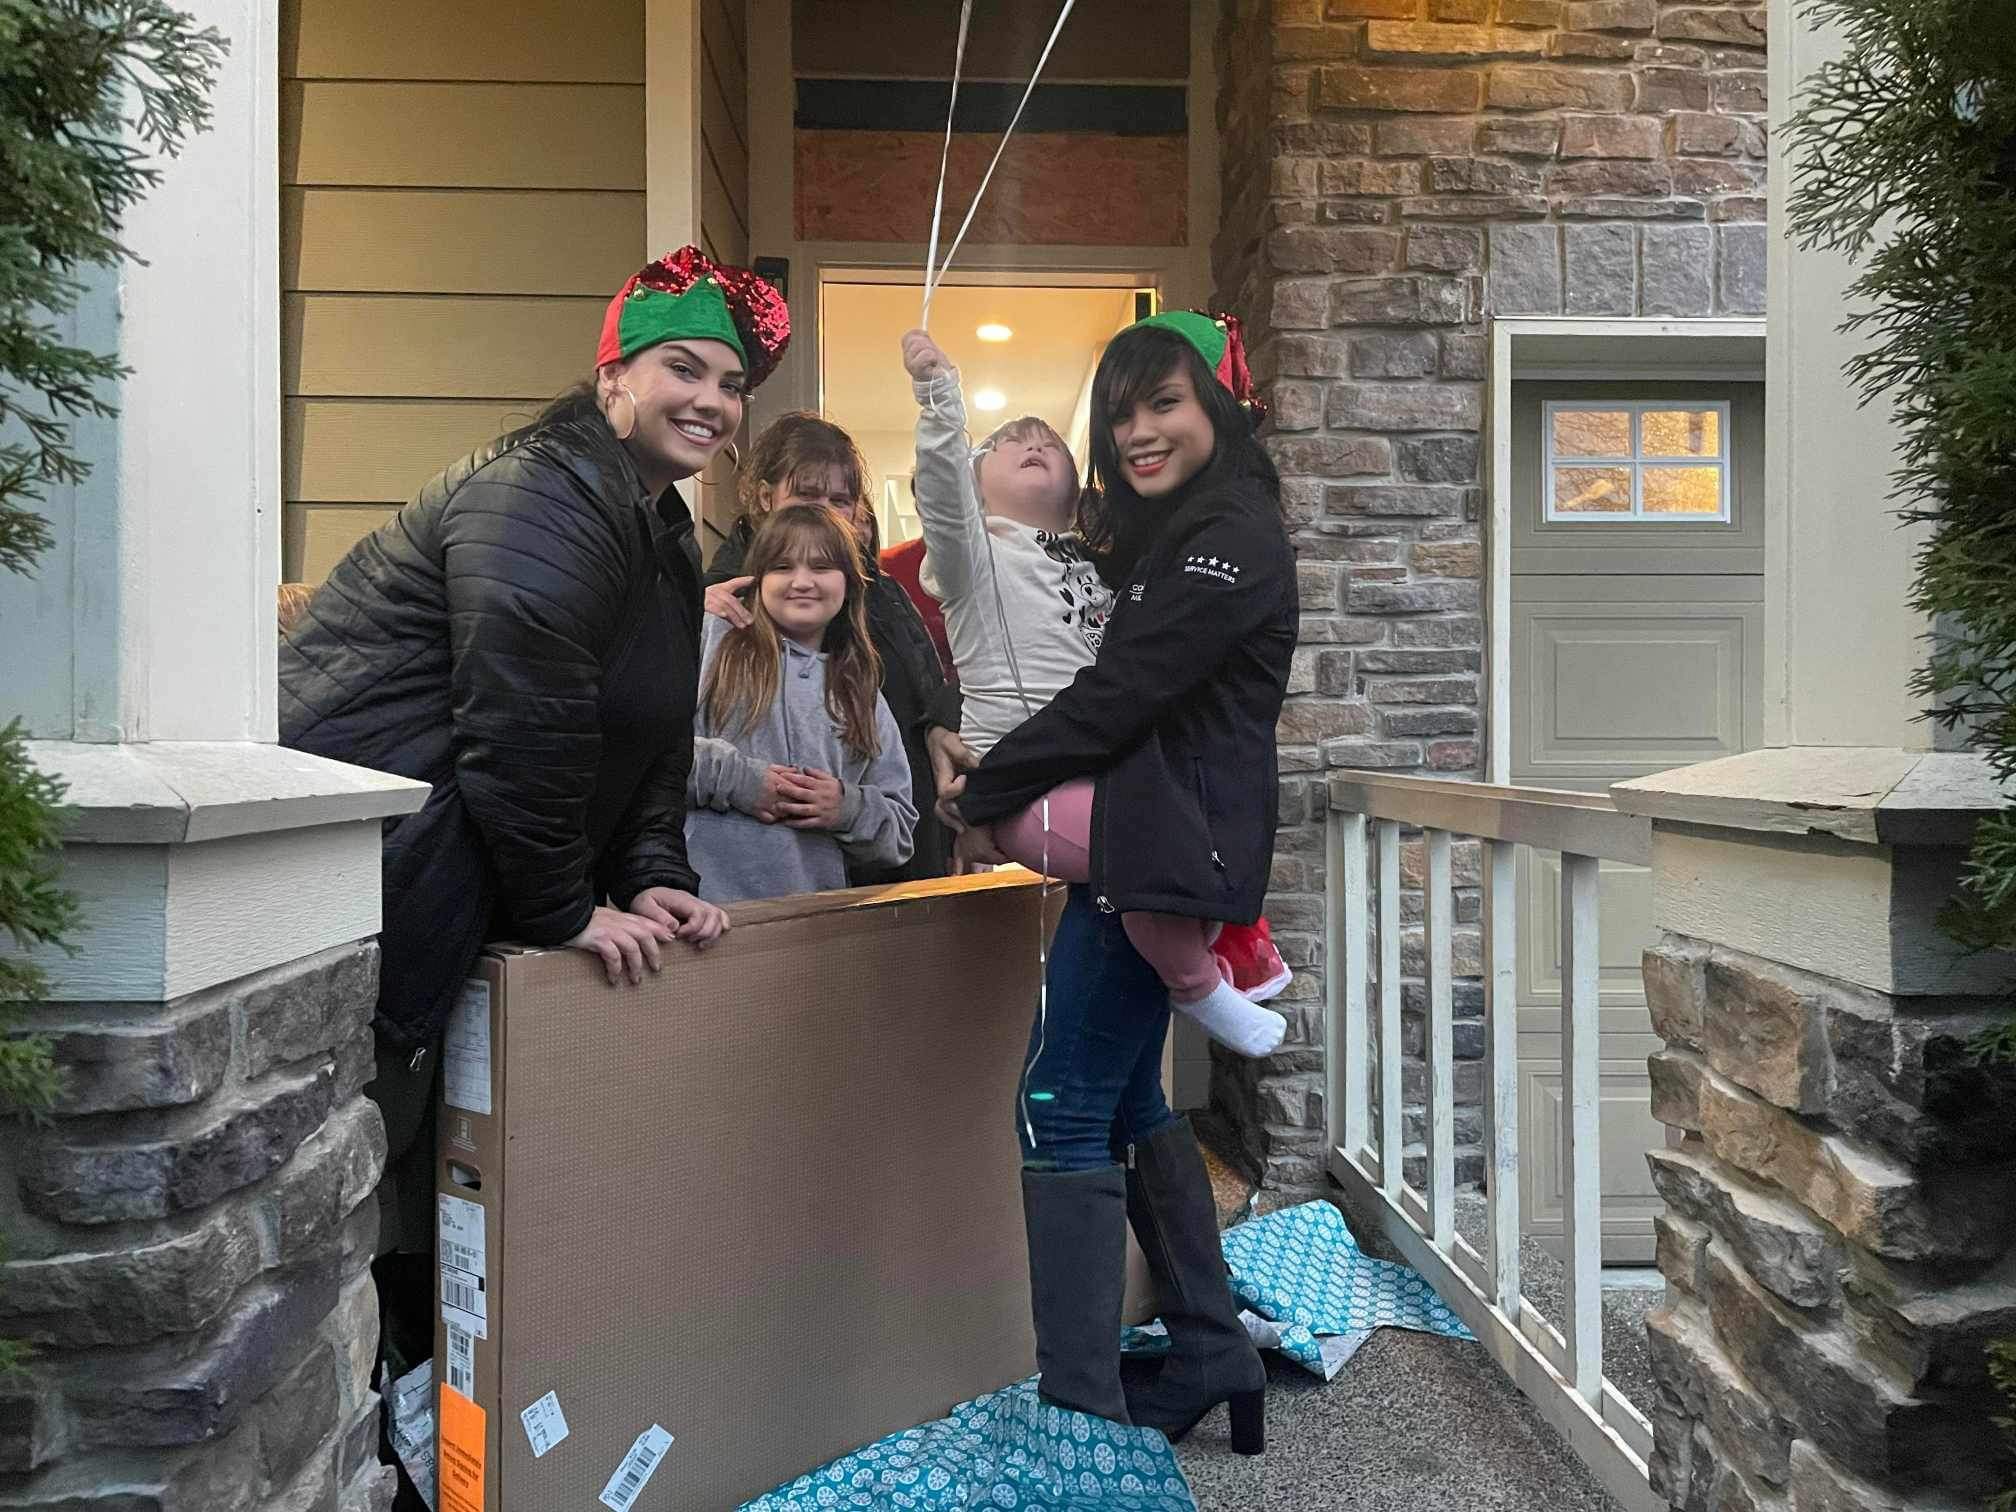 Comcast employees surprise a family at their home with a TV.